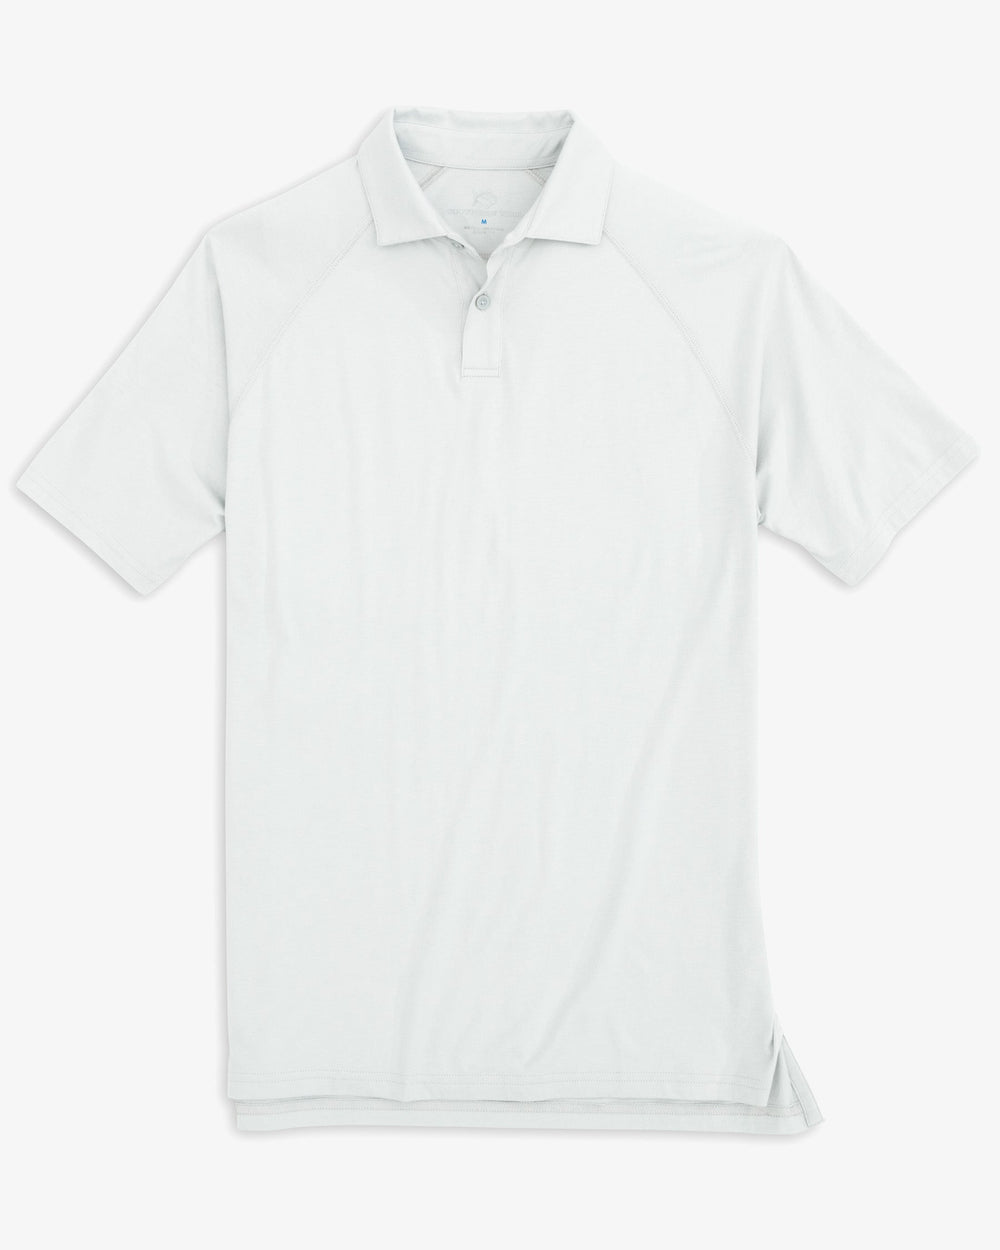 The front view of the Men's Racquet Performance Polo Shirt by Southern Tide - Classic White